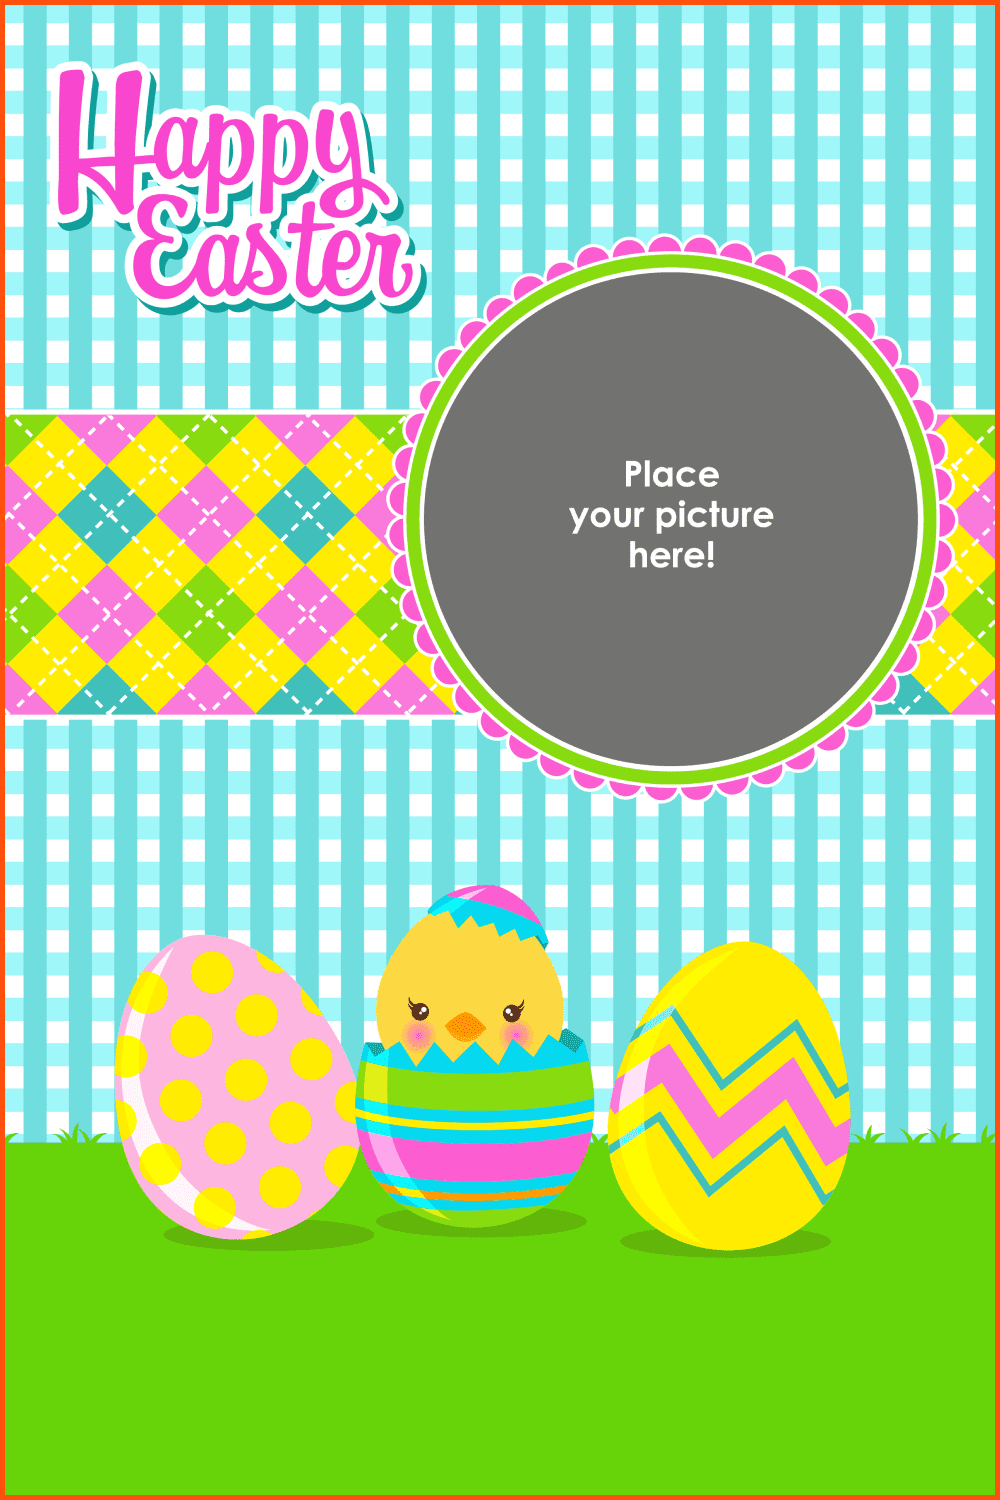 Free easter vector graphics you won t have to hunt for.